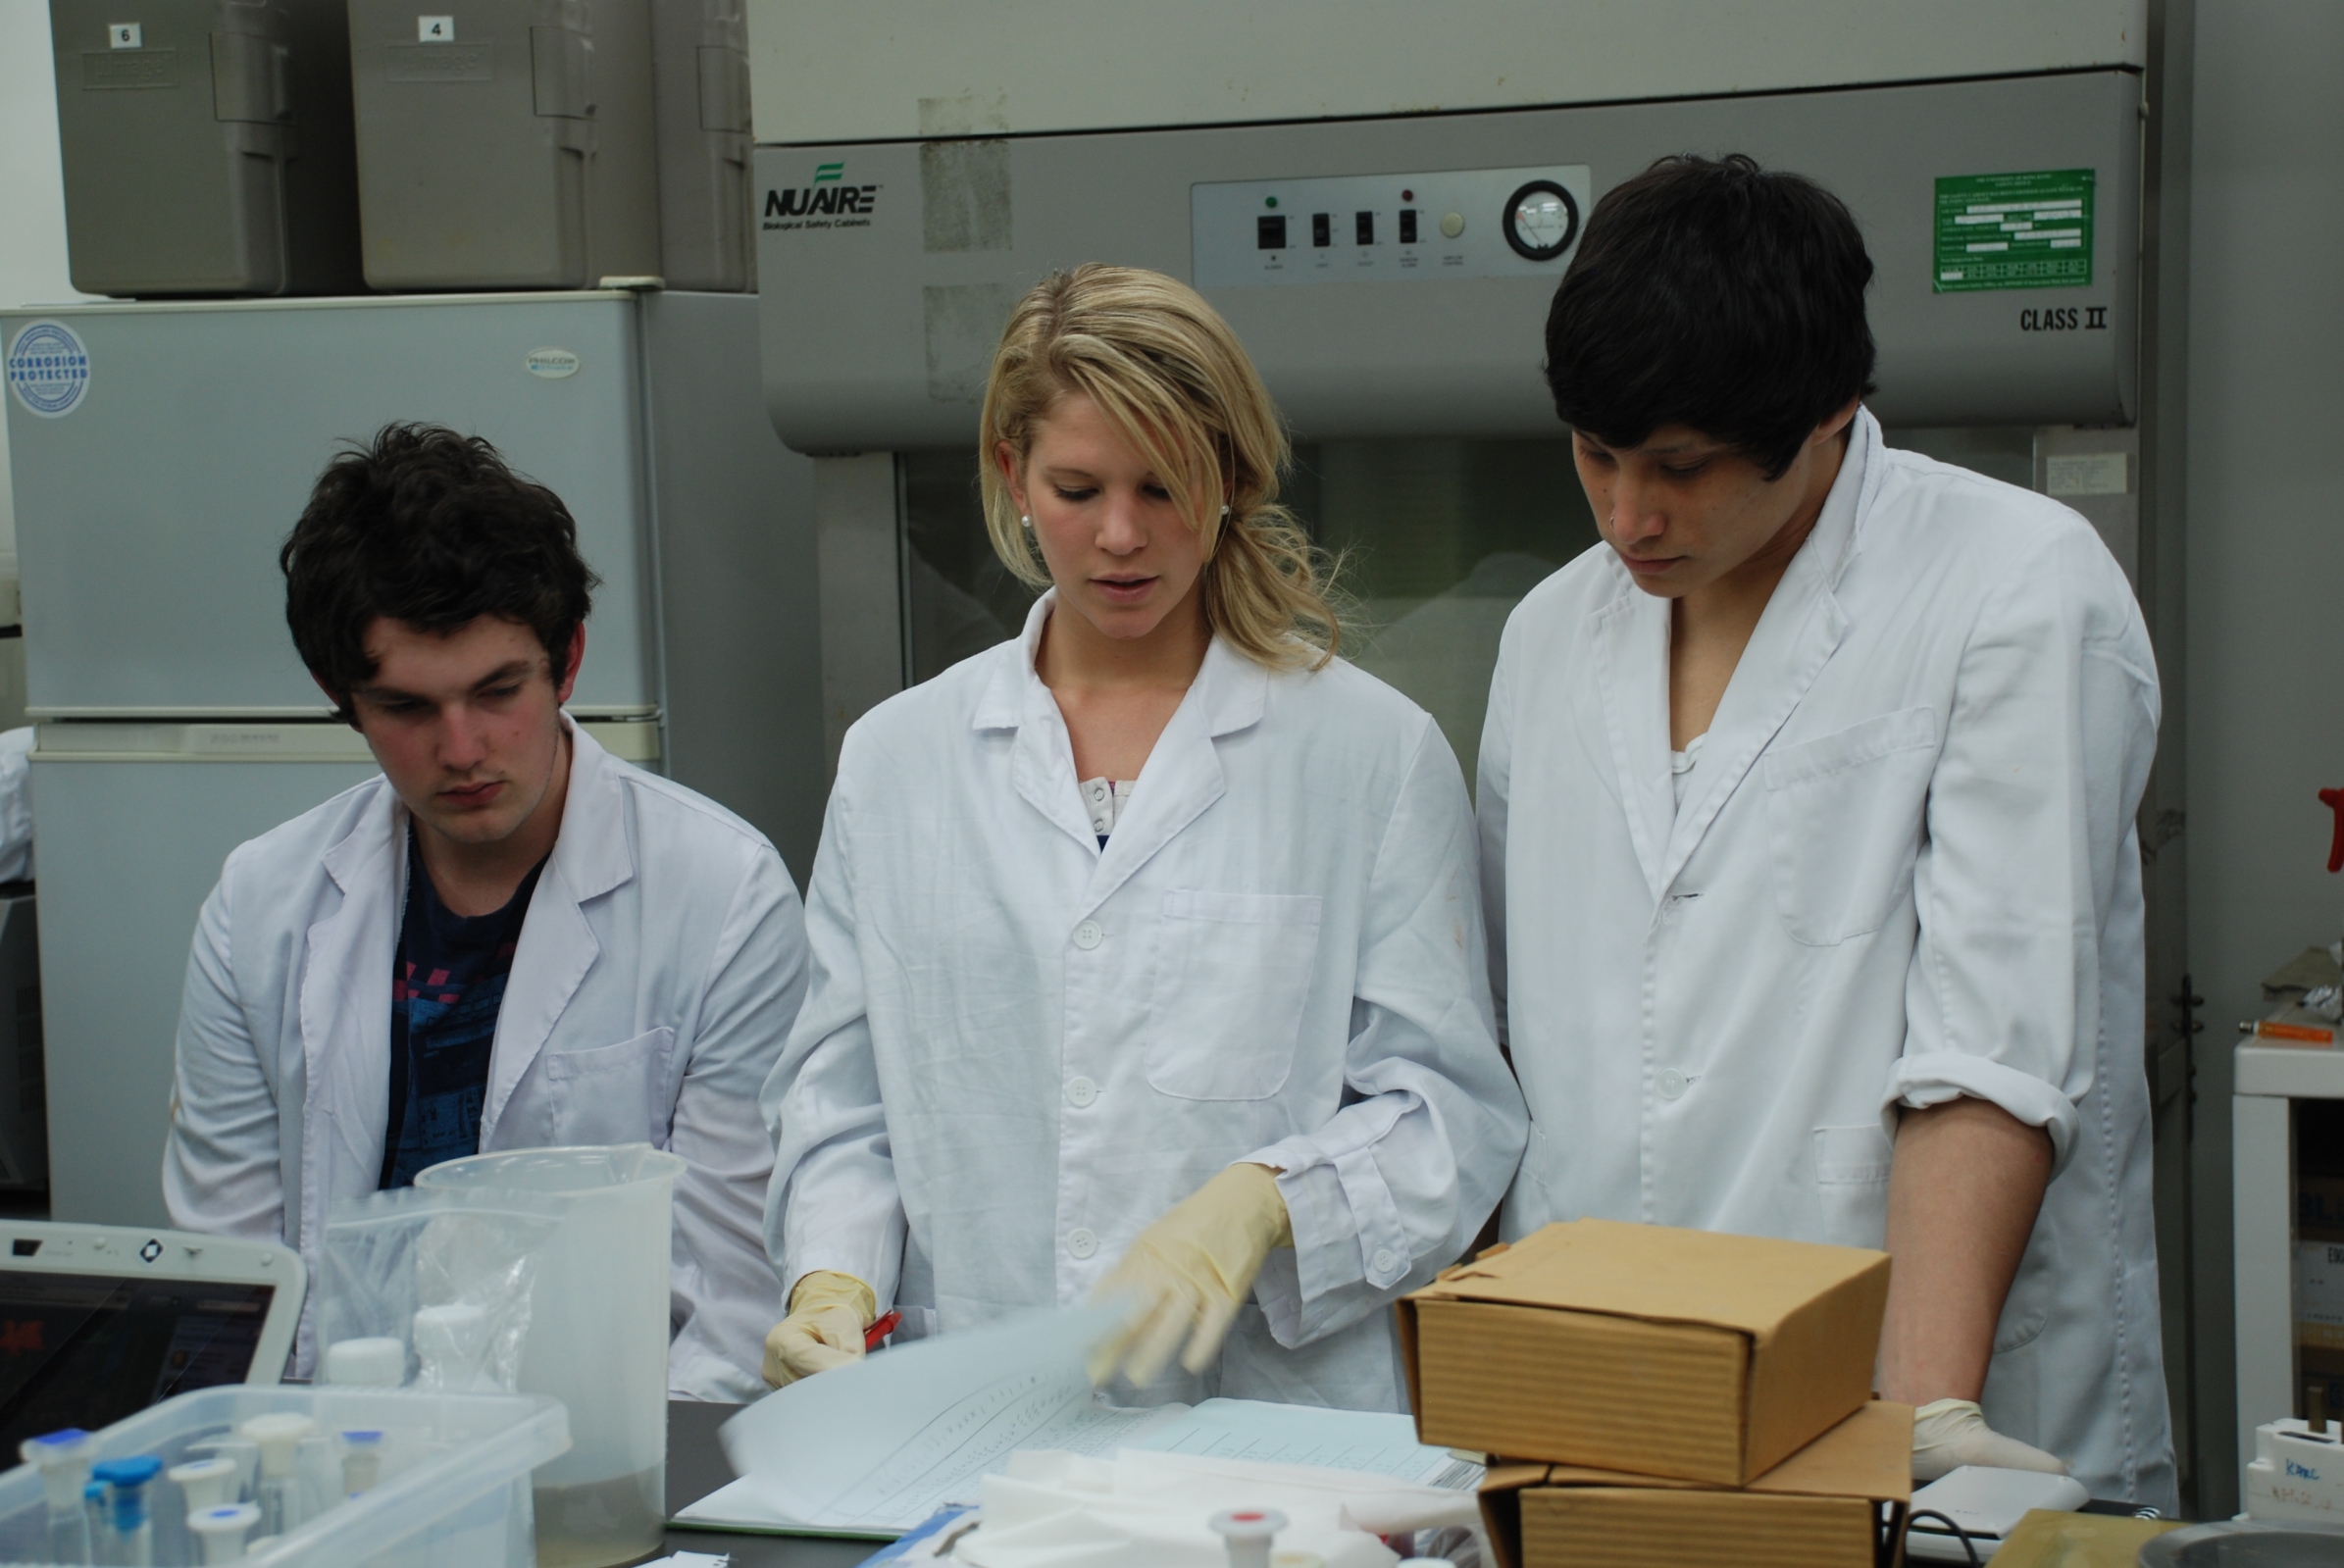 Students in the laboratory of Kadoorie Research Centre, University of Hong Kong. (c) C Braungardt